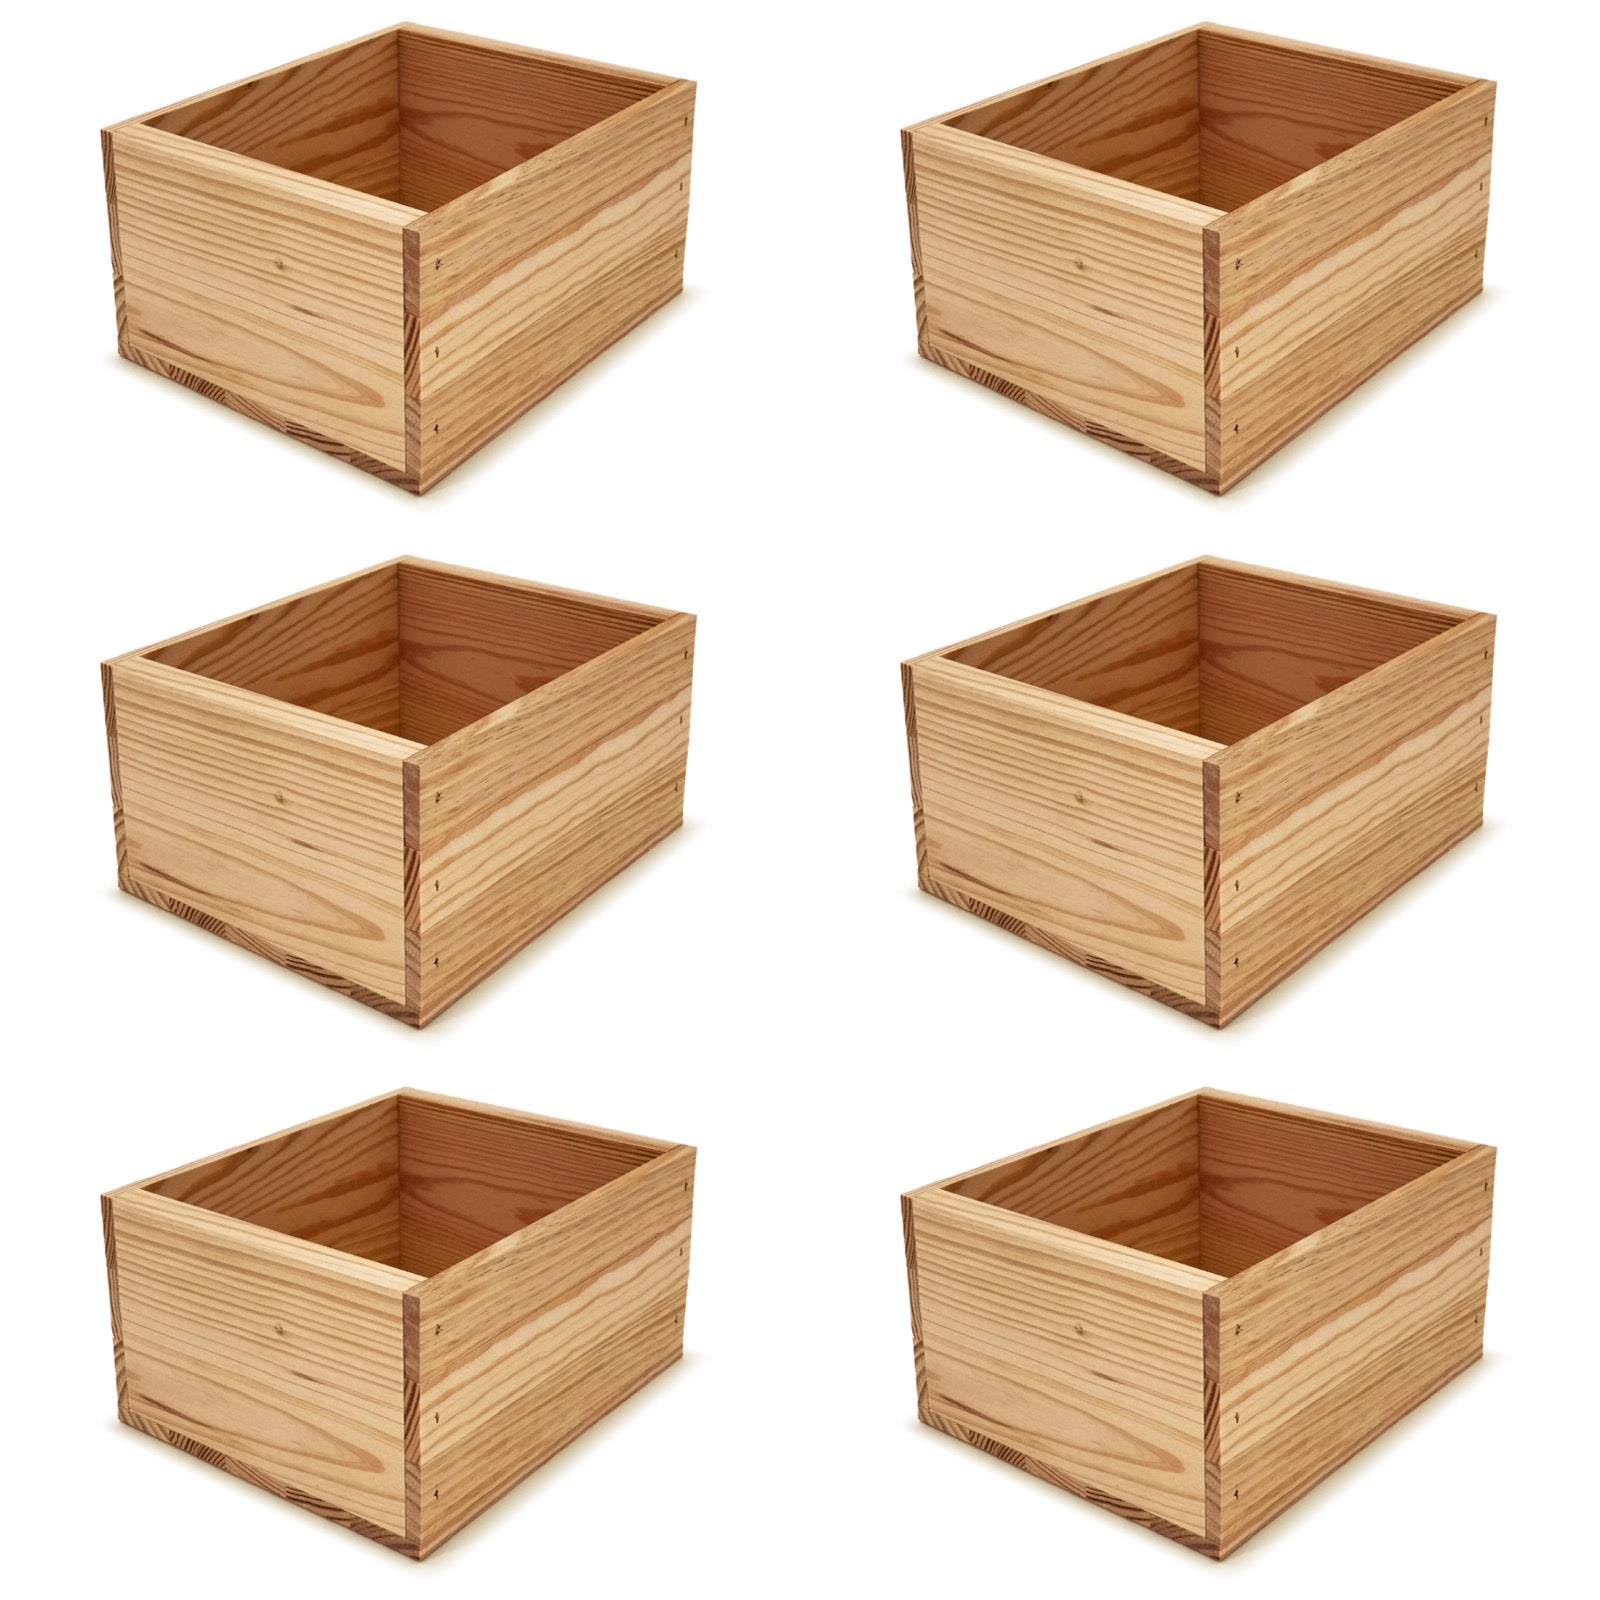 6 Small wooden crates 9x8x5.25